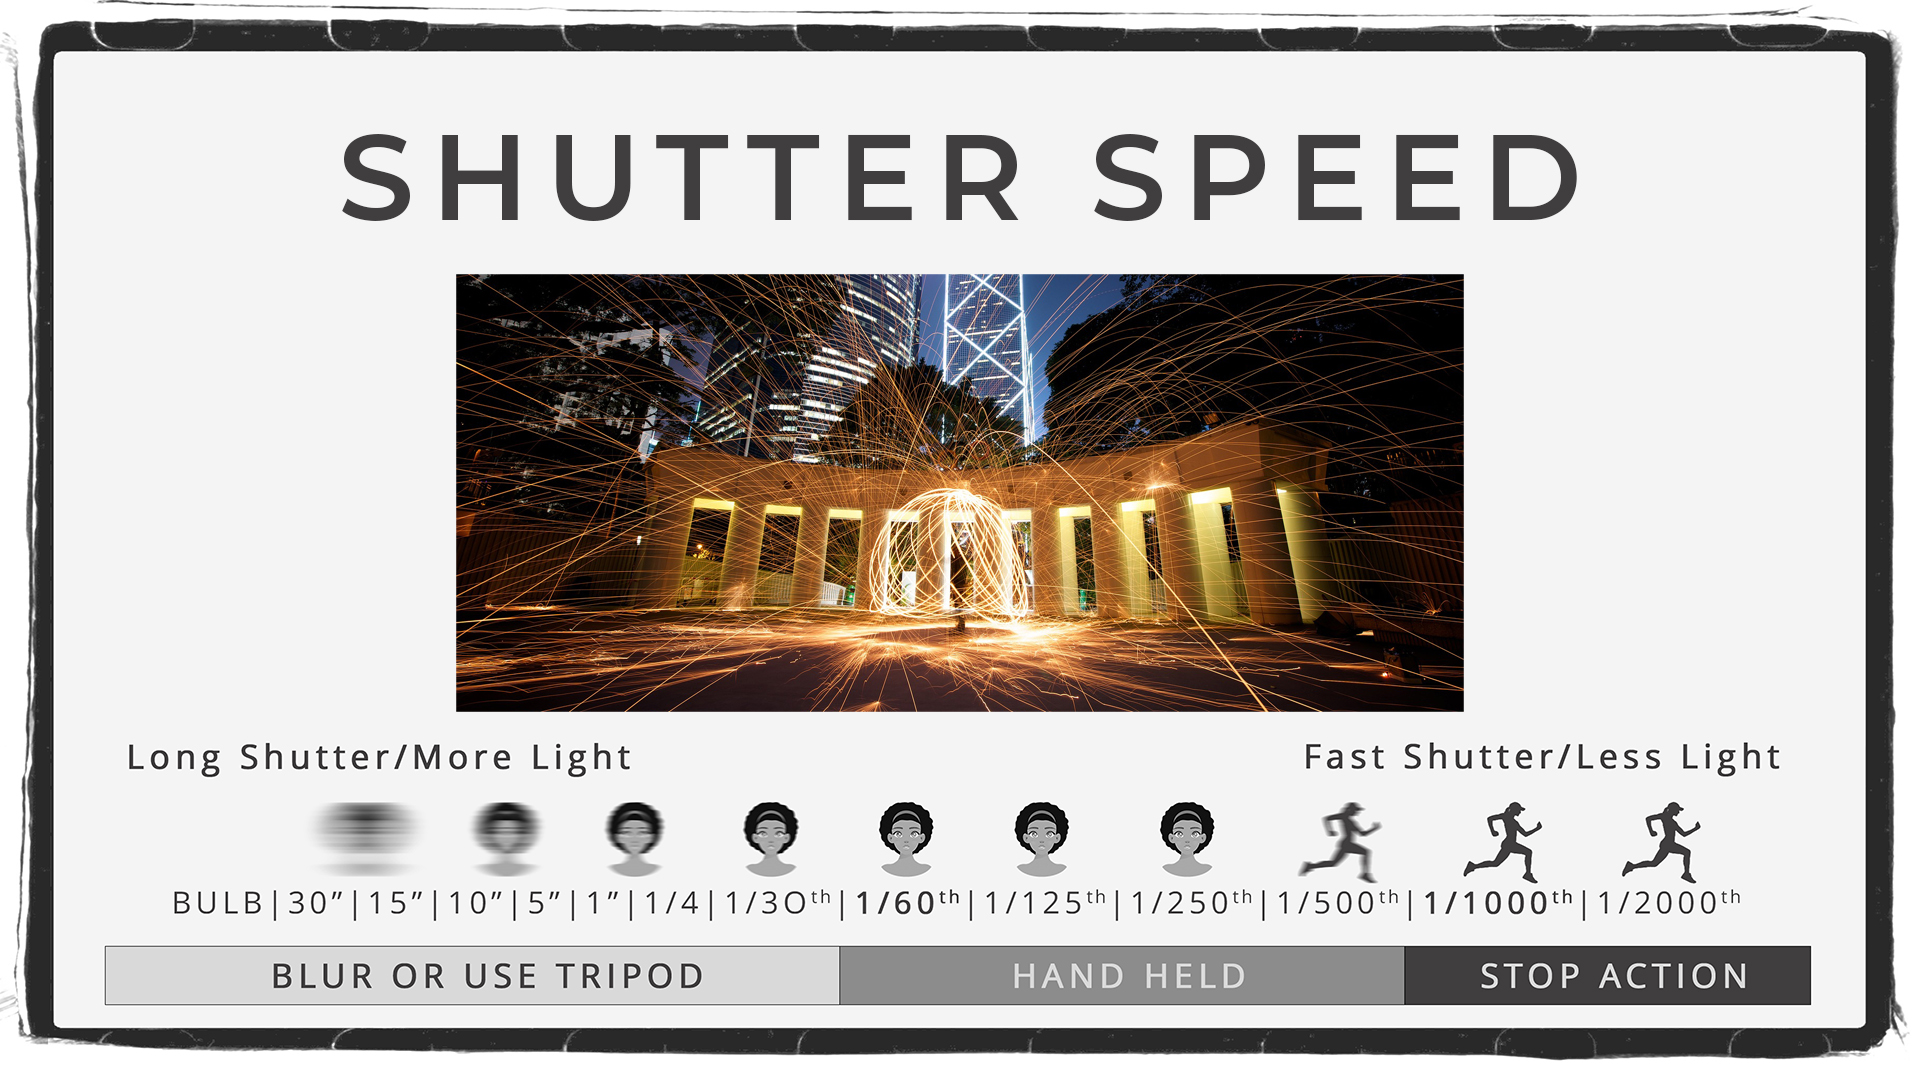 Understand the 2 Functions of Shutter Speed to Capture Stunning Photos in Manual<span class="rmp-archive-results-widget rmp-archive-results-widget--not-rated"><i class=" rmp-icon rmp-icon--ratings rmp-icon--star "></i><i class=" rmp-icon rmp-icon--ratings rmp-icon--star "></i><i class=" rmp-icon rmp-icon--ratings rmp-icon--star "></i><i class=" rmp-icon rmp-icon--ratings rmp-icon--star "></i><i class=" rmp-icon rmp-icon--ratings rmp-icon--star "></i> <span>0 (0)</span></span>